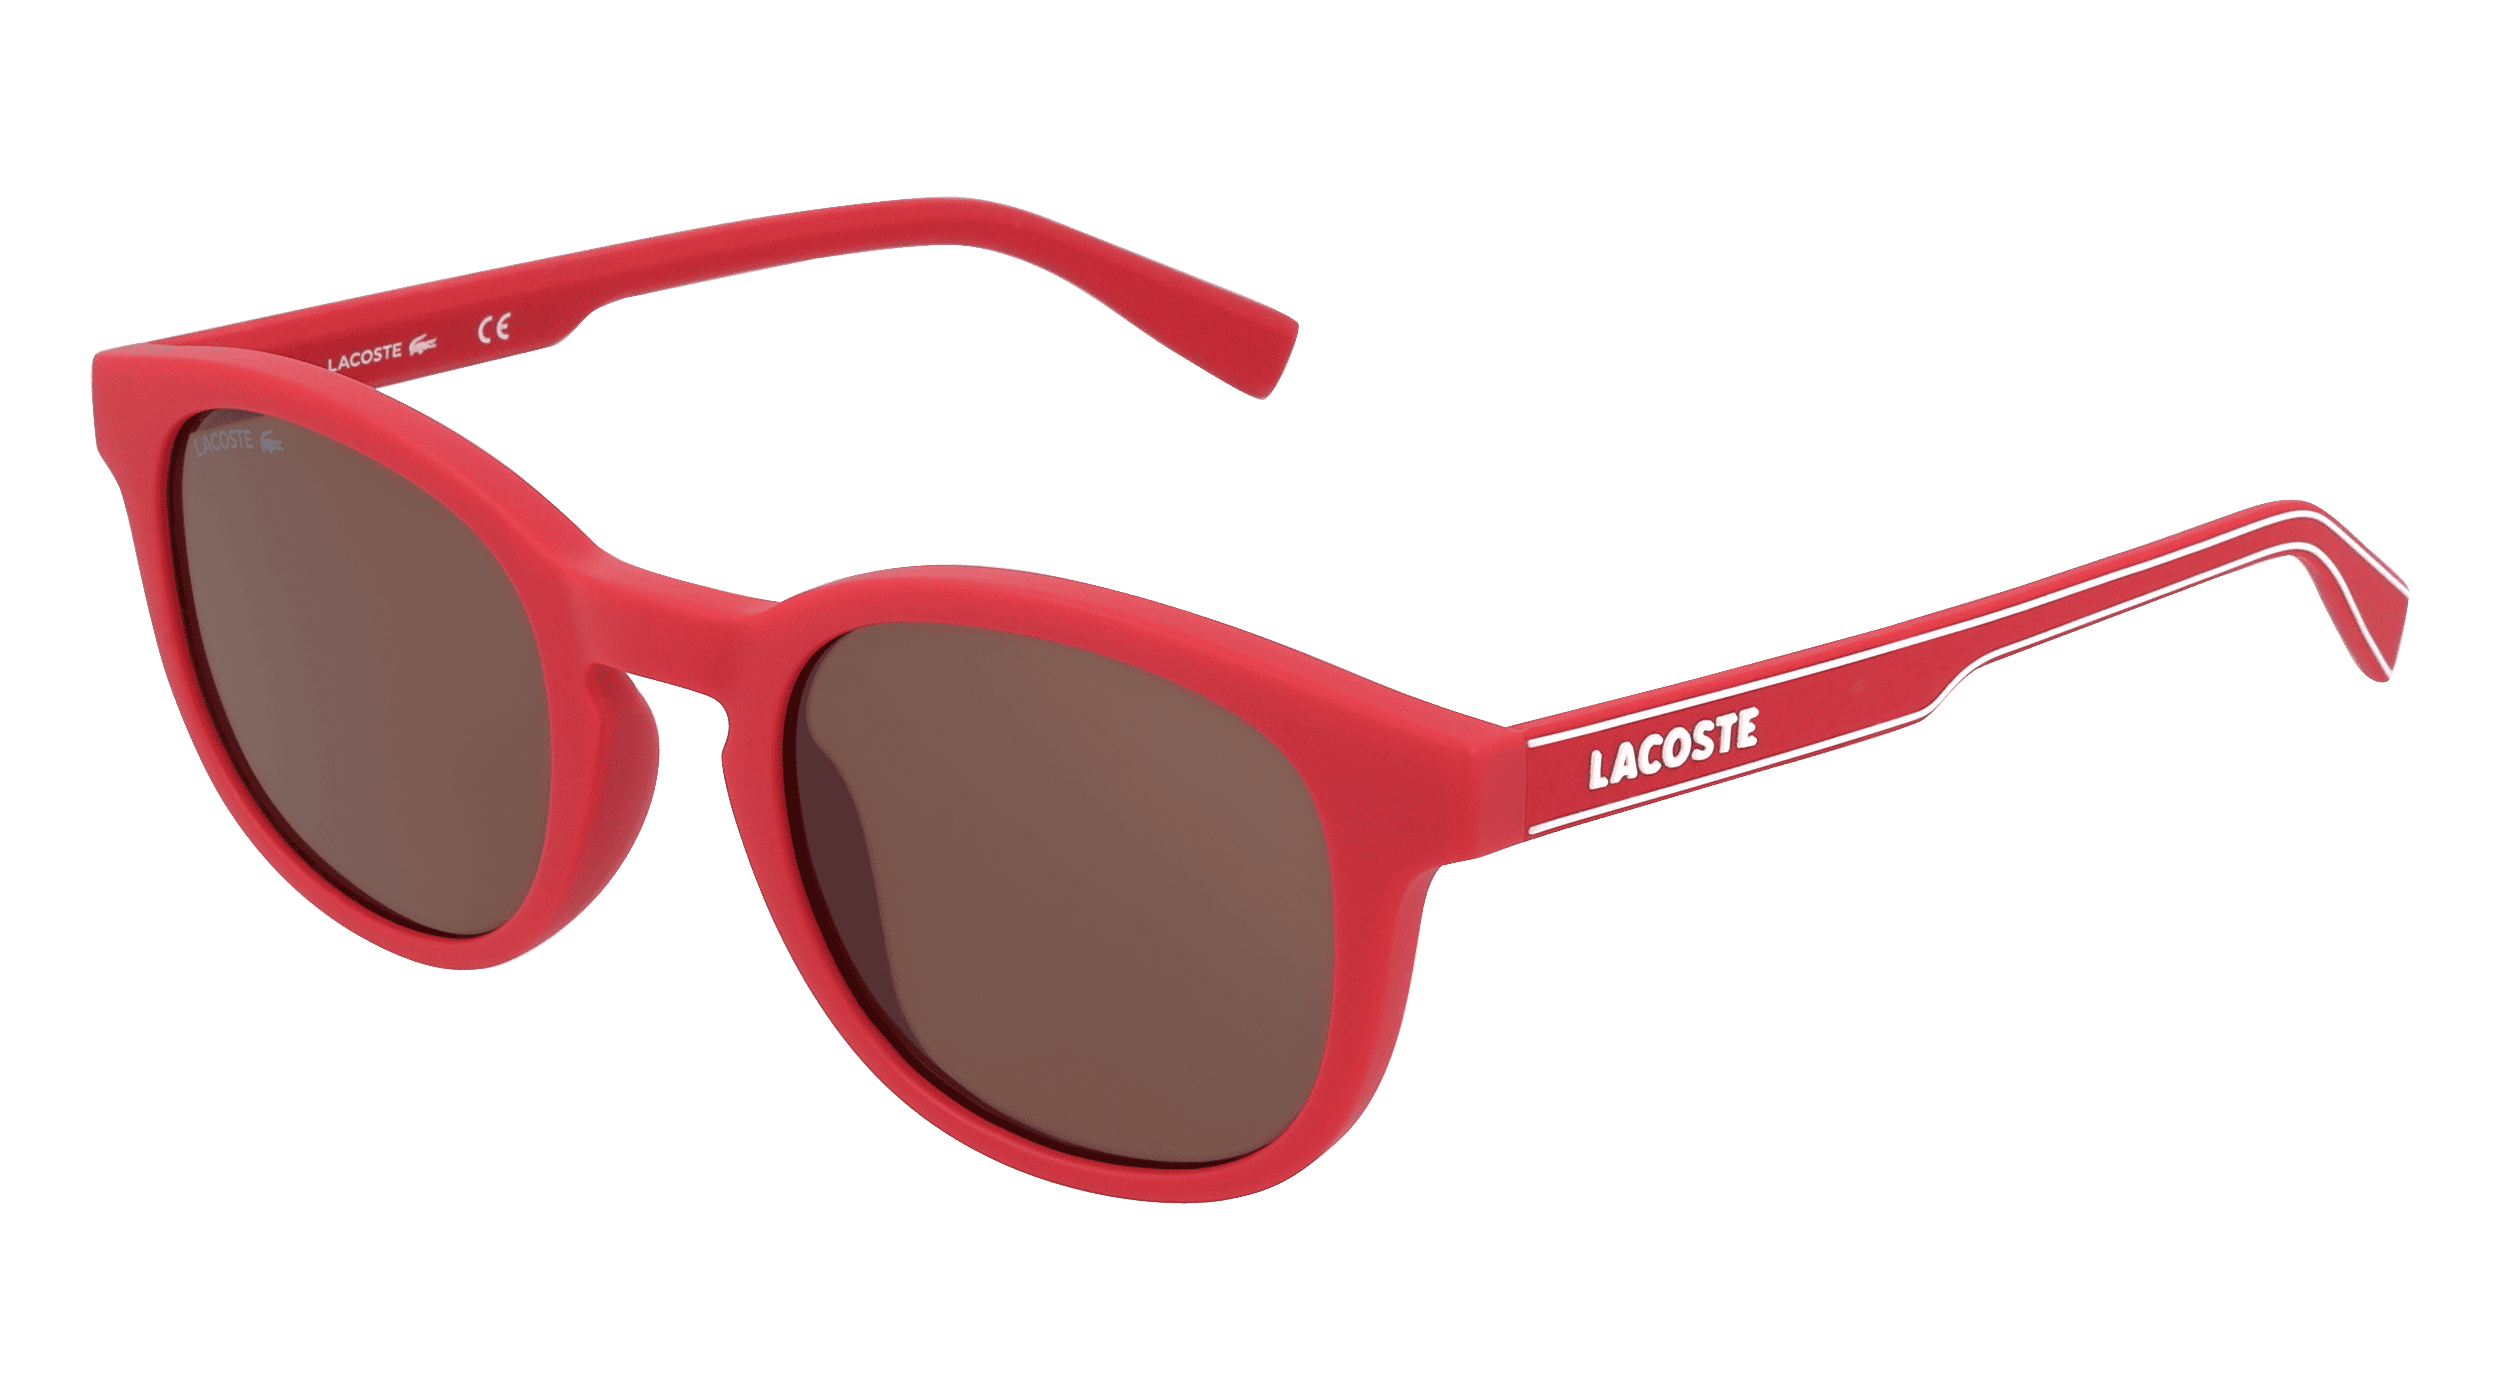 Marchon Germany Lacoste Kids L3644S Jugend-Sonnenbrille Vollrand Panto Kunststoff-Gestell, rot